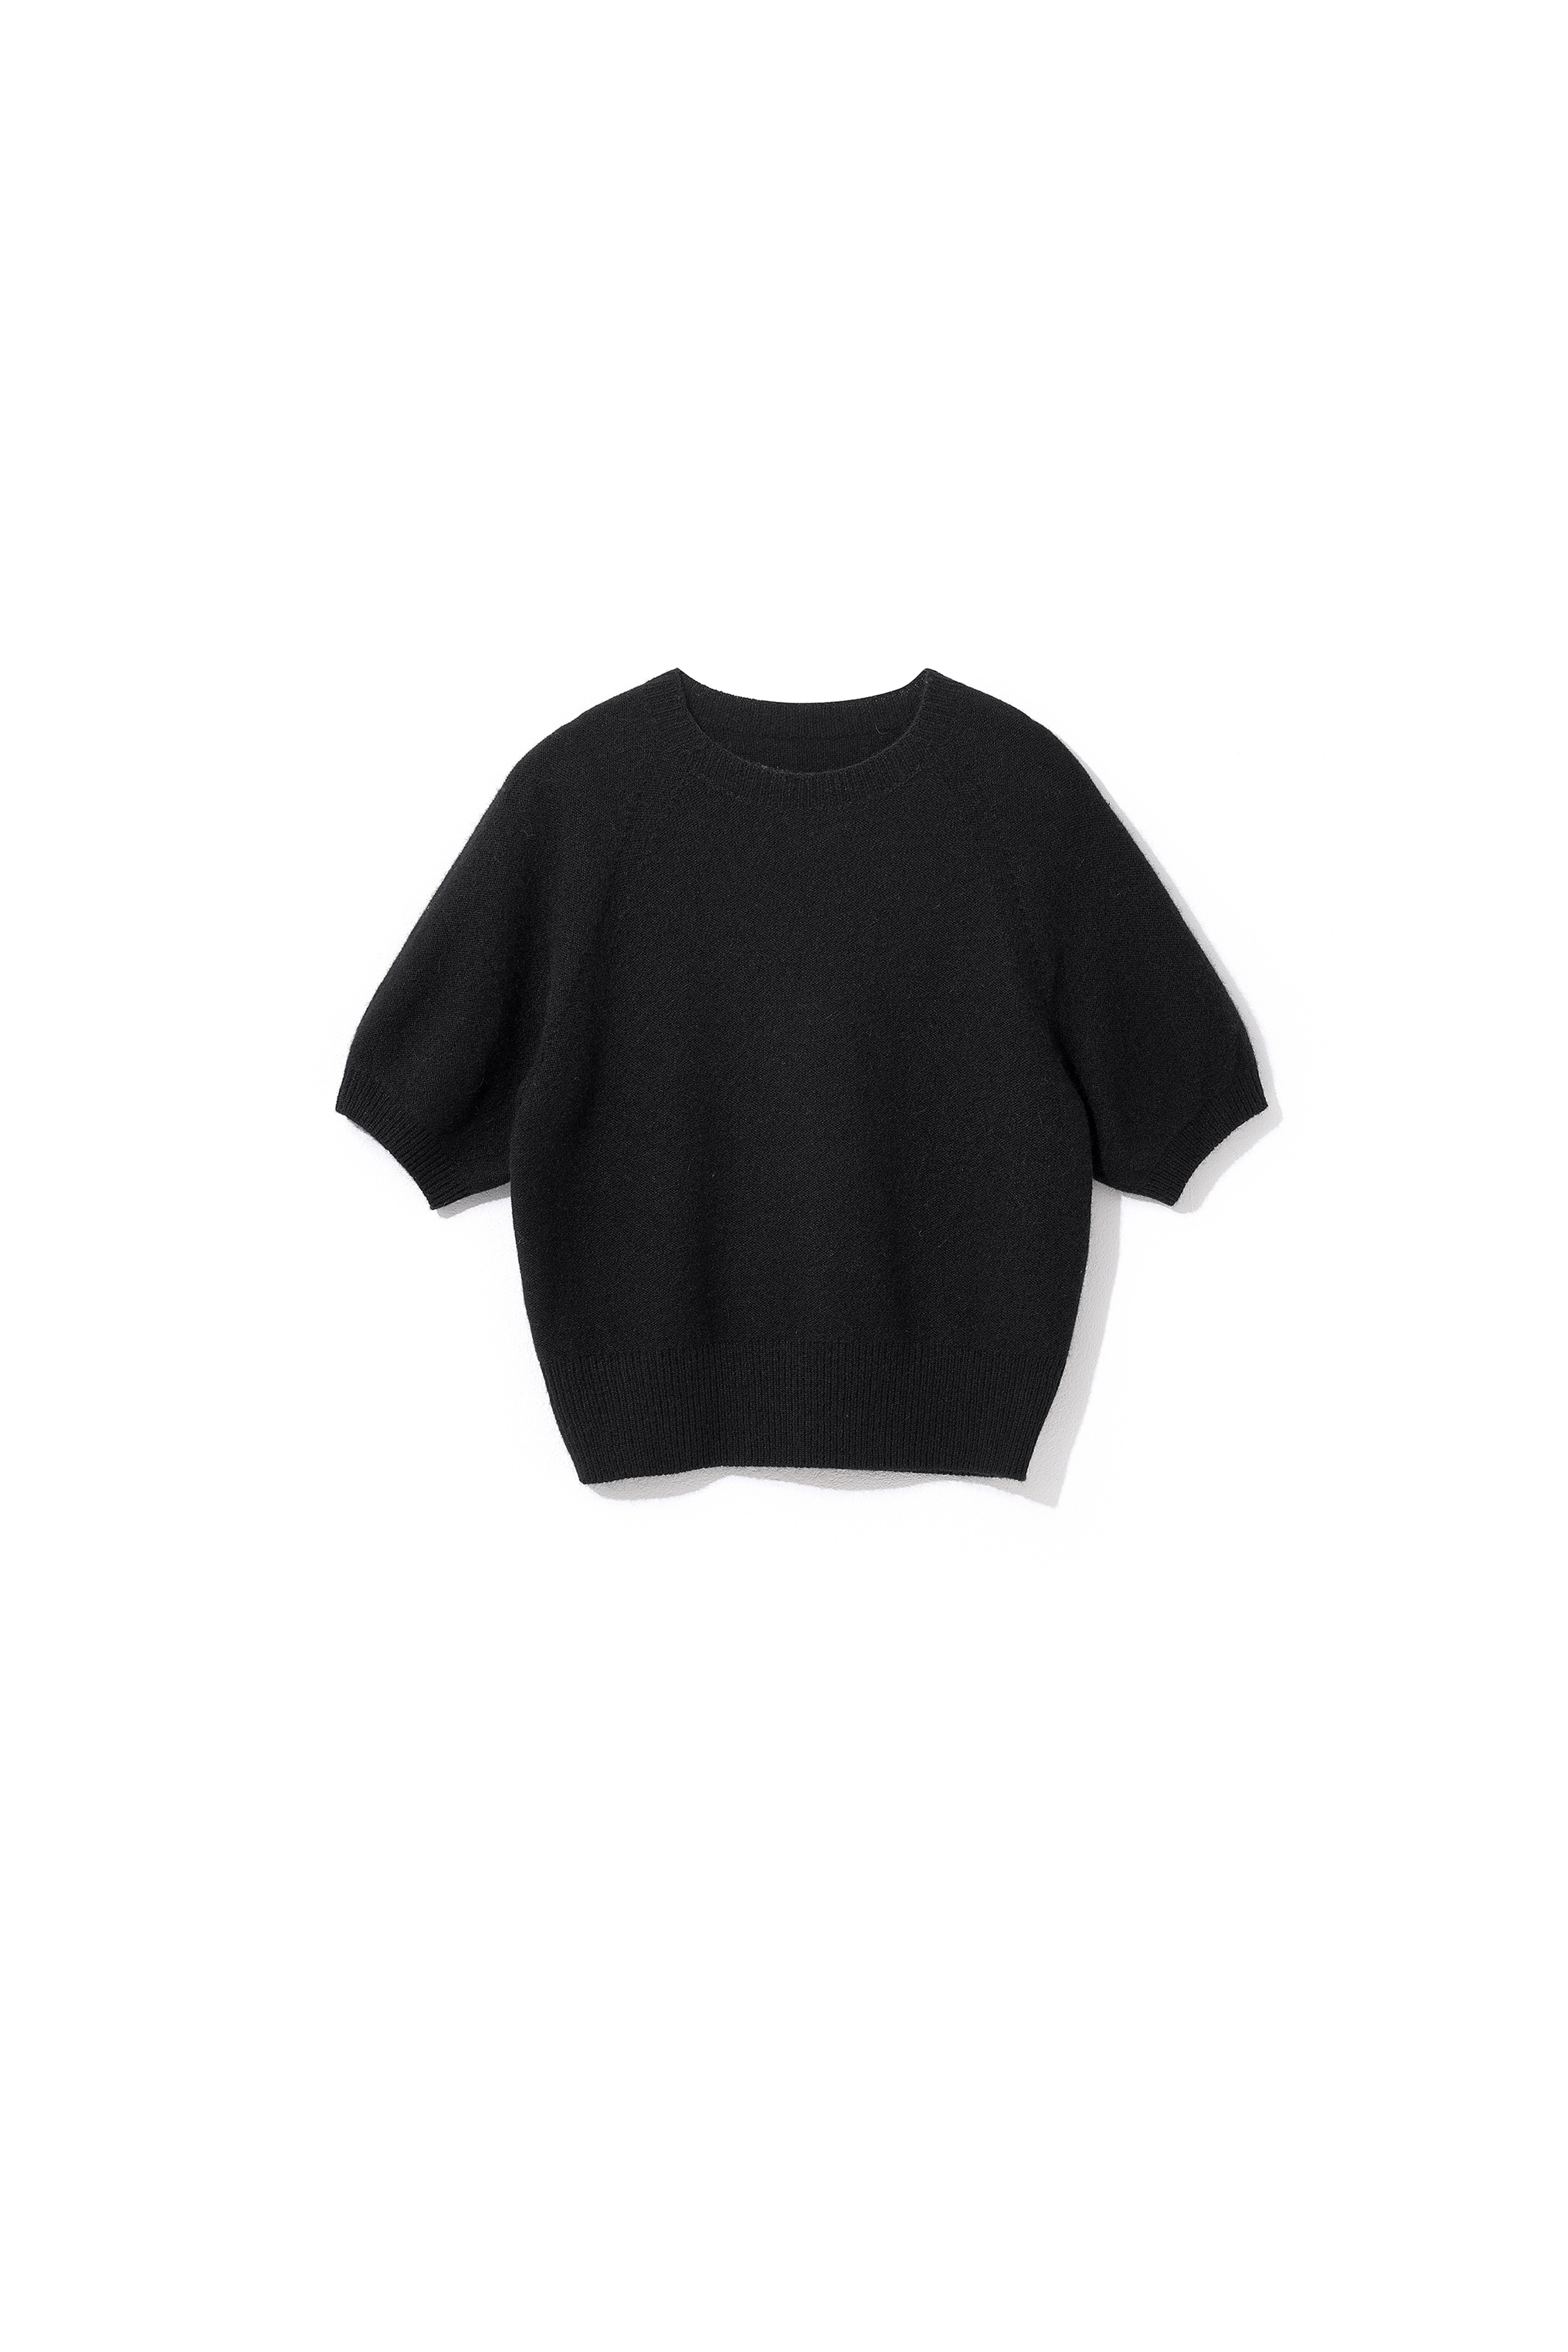 2nd) Mong Puff Sleeve Knitted P/O Black